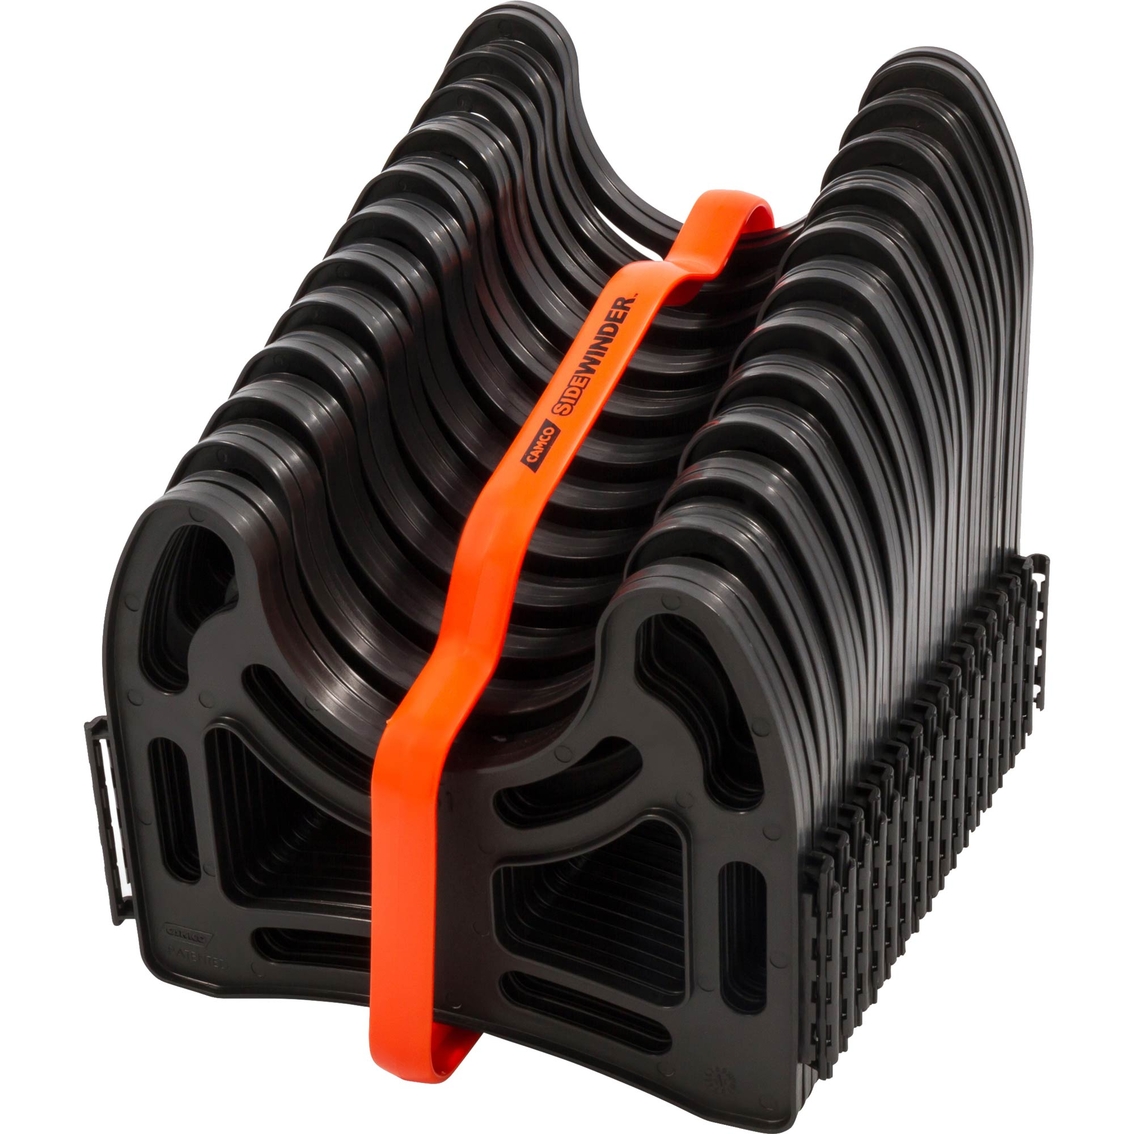 Camco Sidewinder 15 ft. Plastic Sewer Hose Support - Image 3 of 8